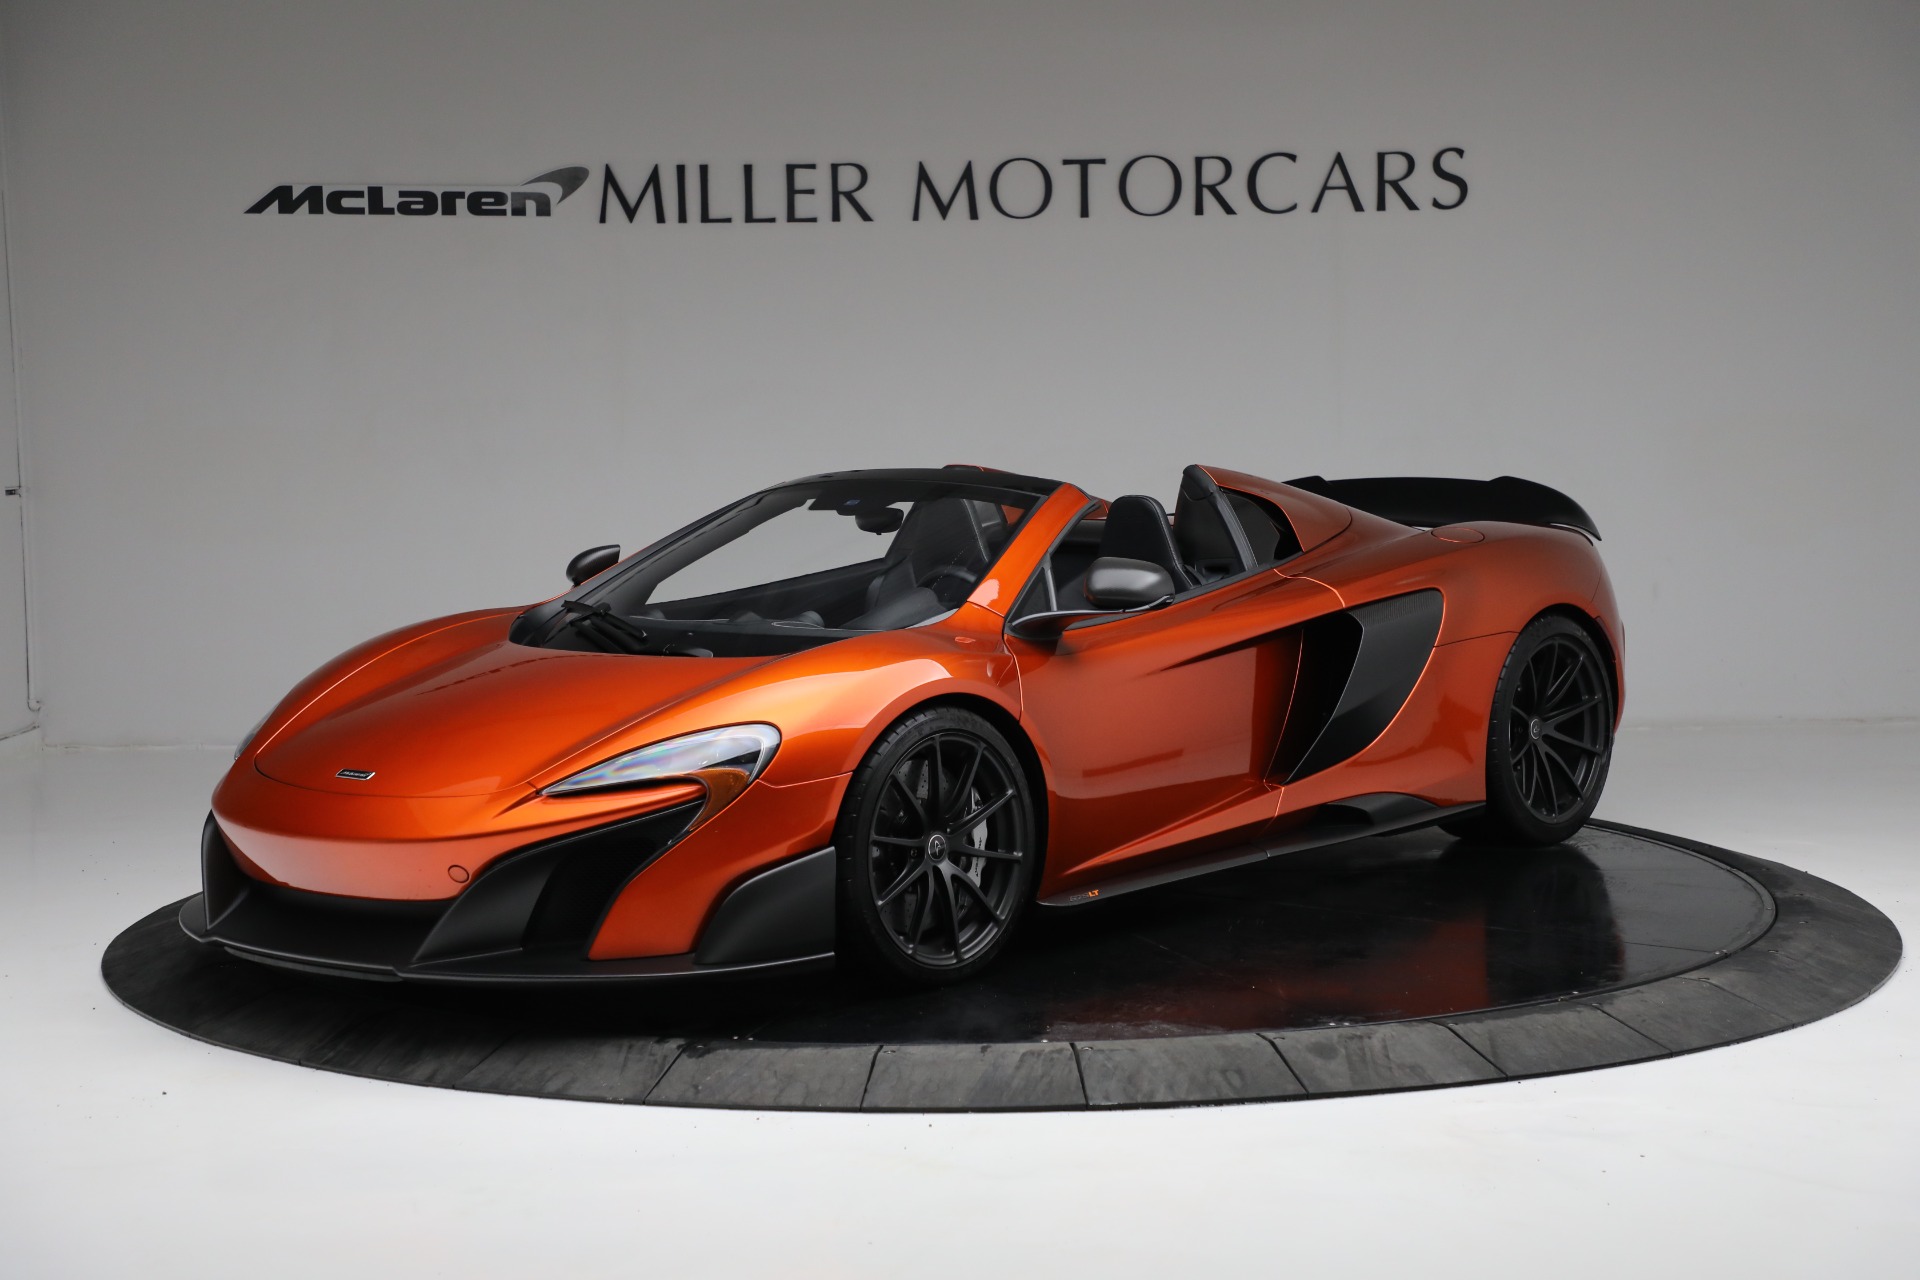 Used 2016 McLaren 675LT Spider for sale $299,900 at Bugatti of Greenwich in Greenwich CT 06830 1